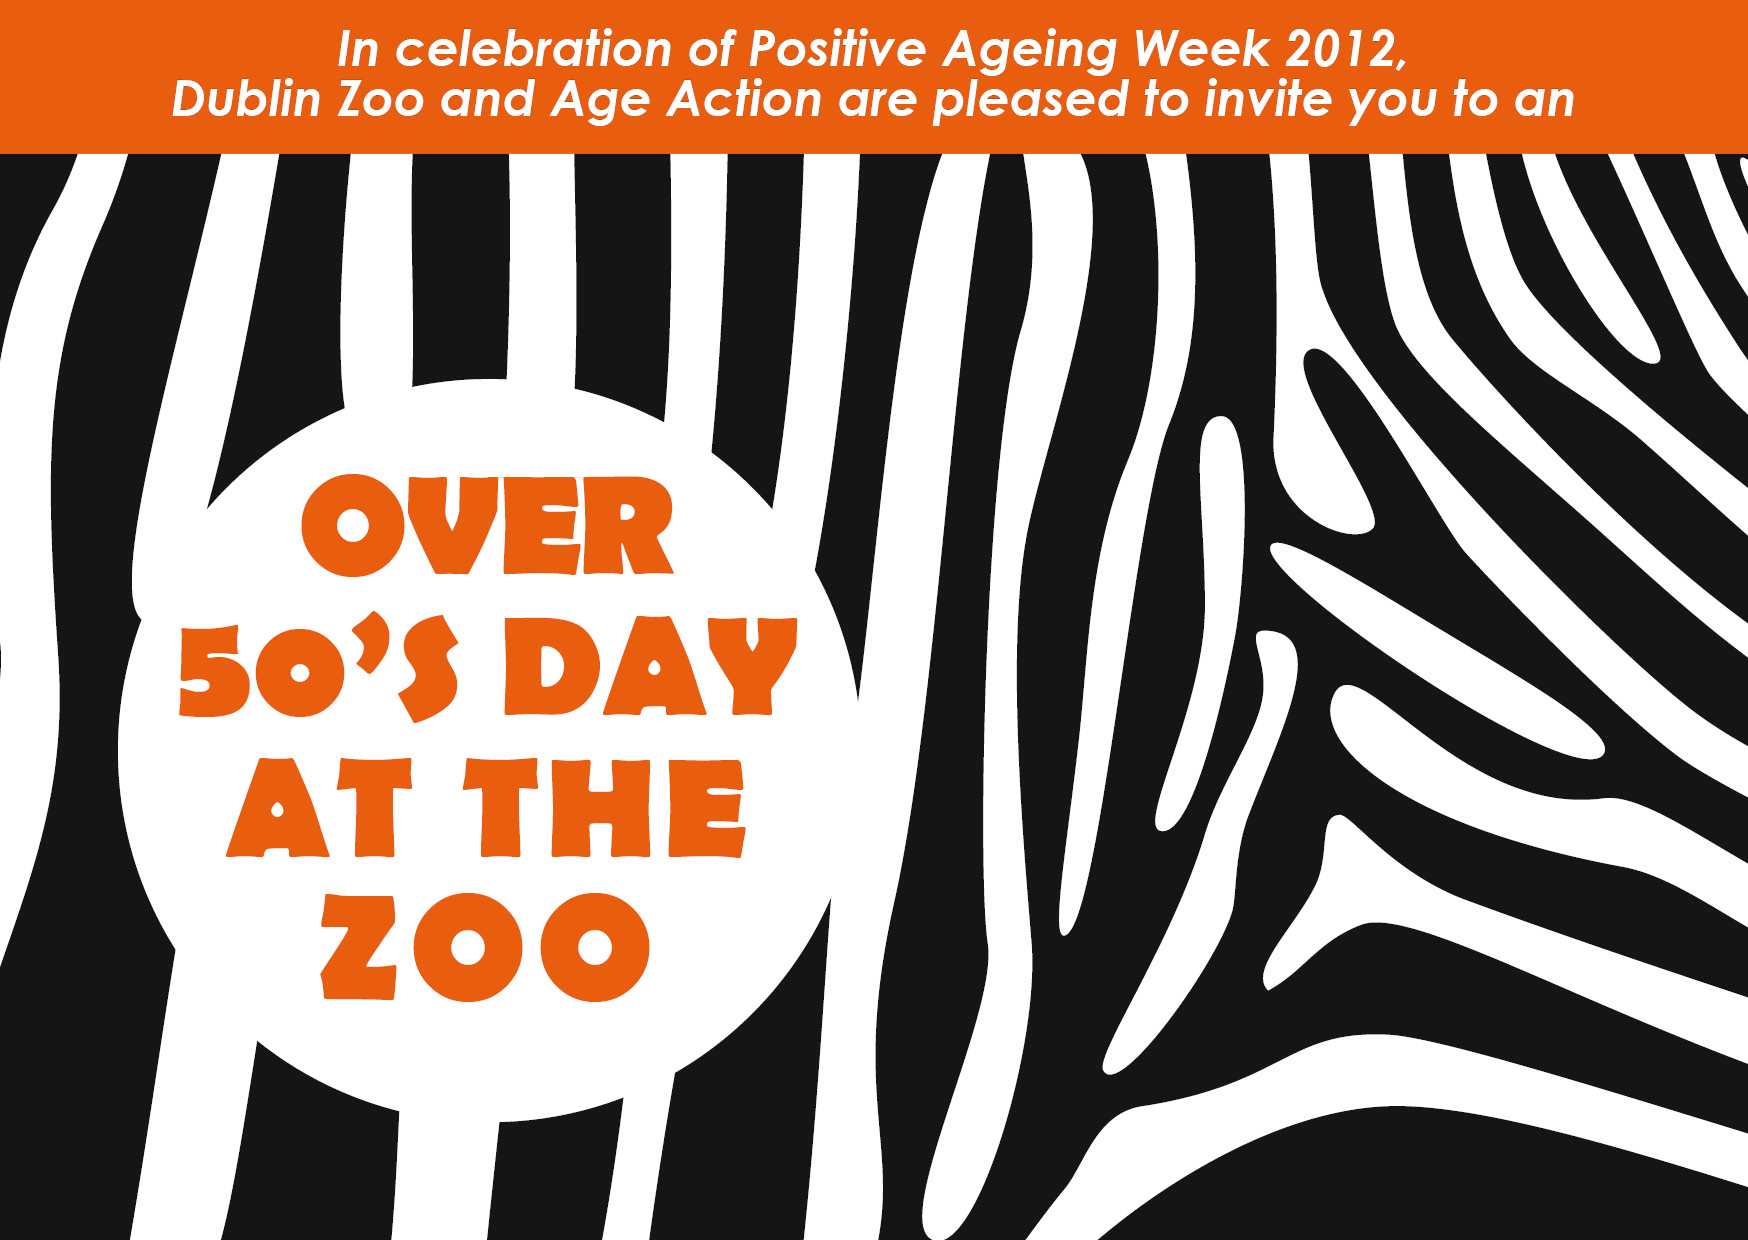 Over 50's Day at the Zoo